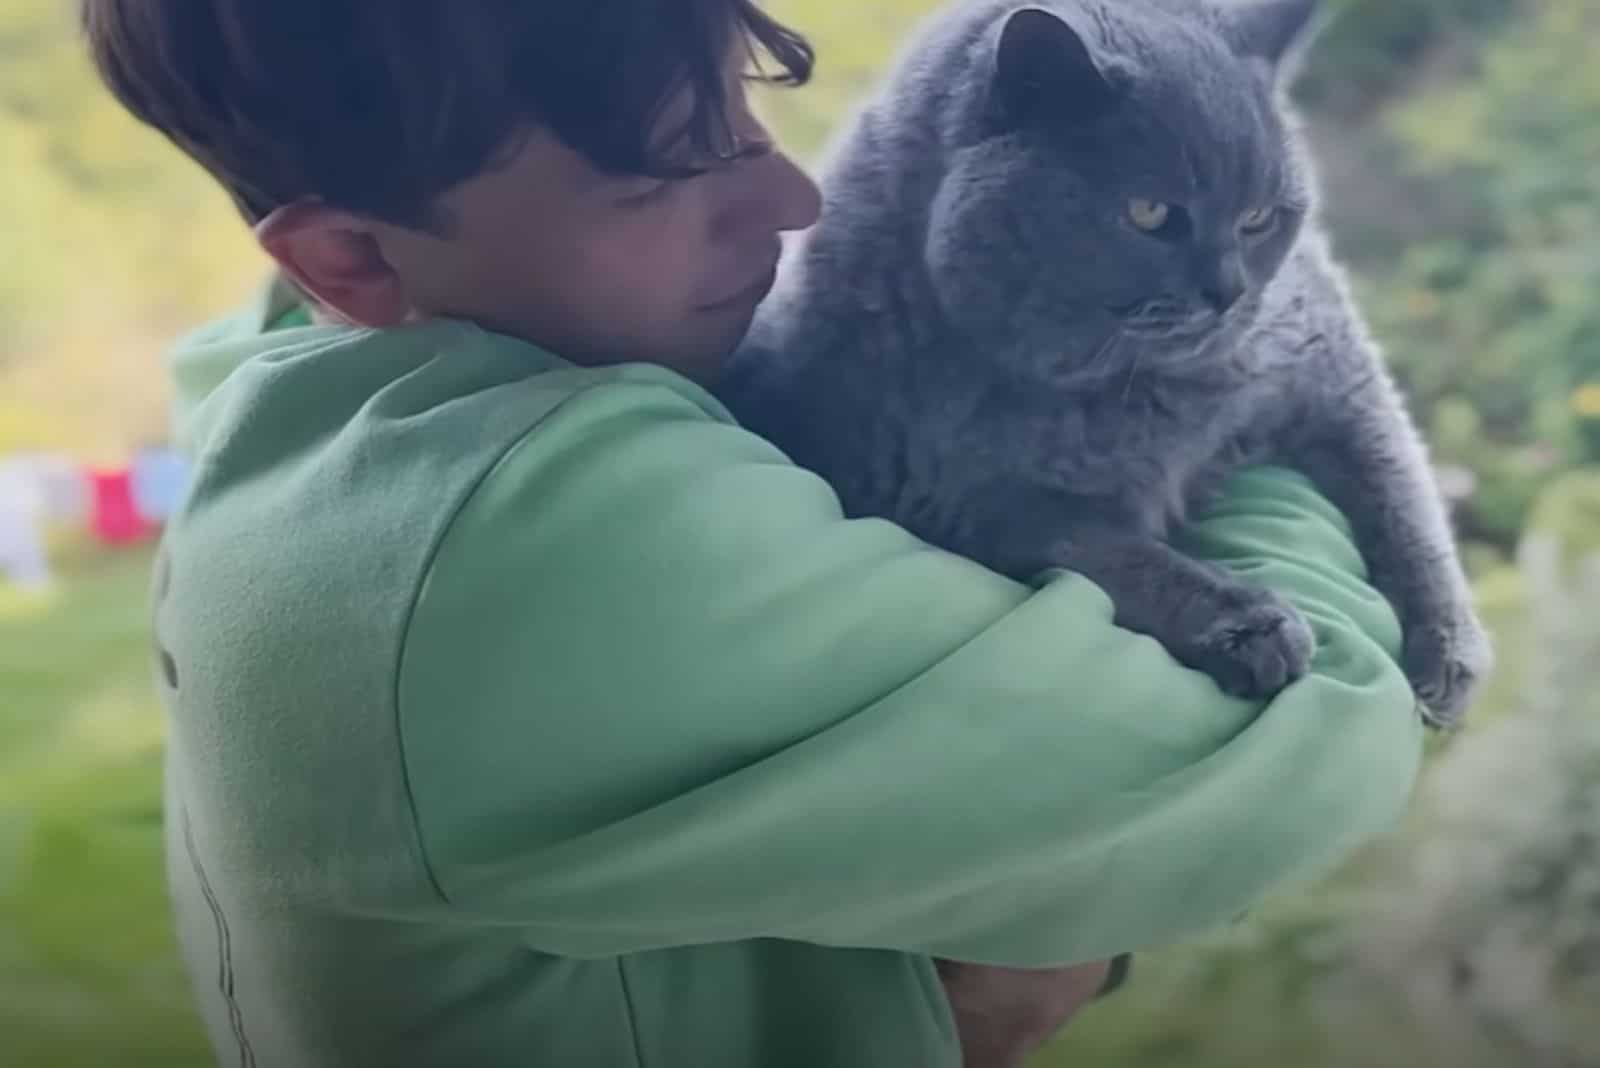 man holding cat in his arms